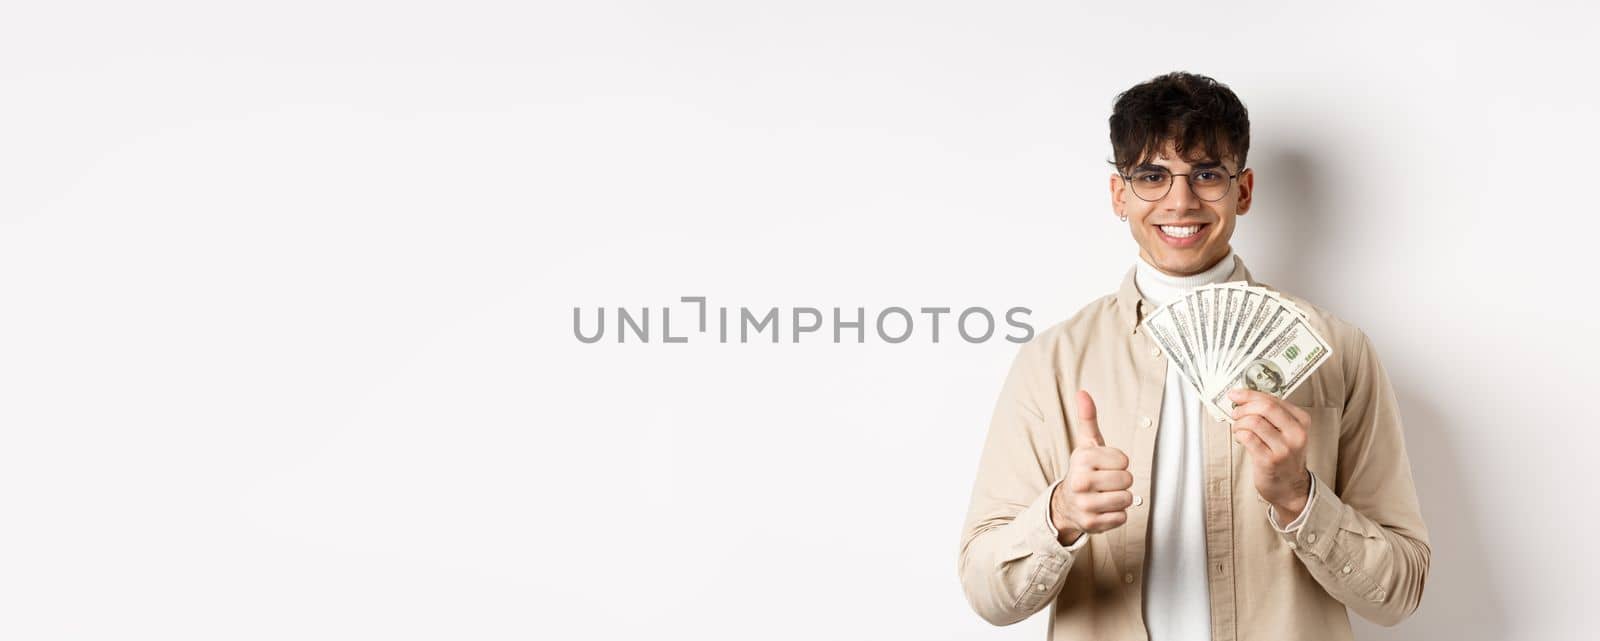 Young guy in glasses showing dollar bills and thumbs up, making money, standing with cash on white background.